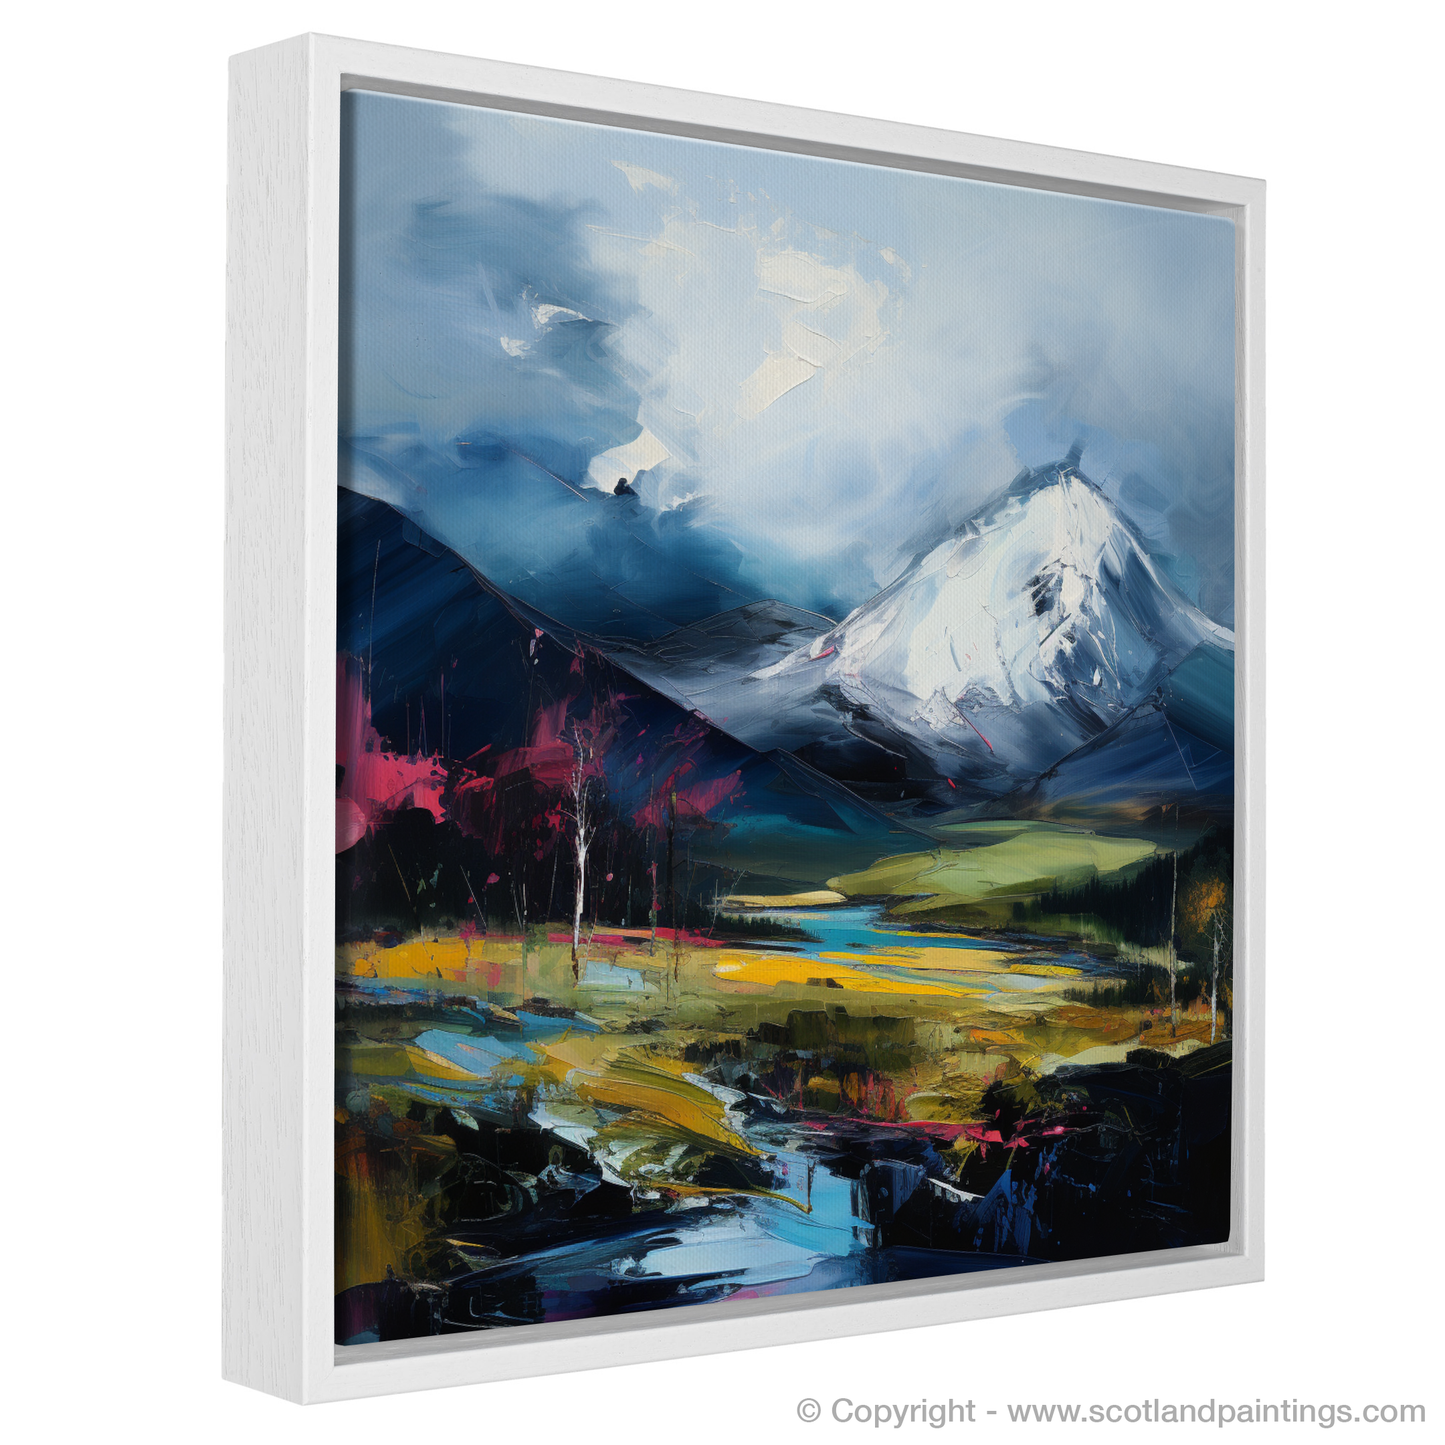 Painting and Art Print of Meall Corranaich entitled "Majestic Meall Corranaich: An Expressionist Ode to Scottish Wilderness".